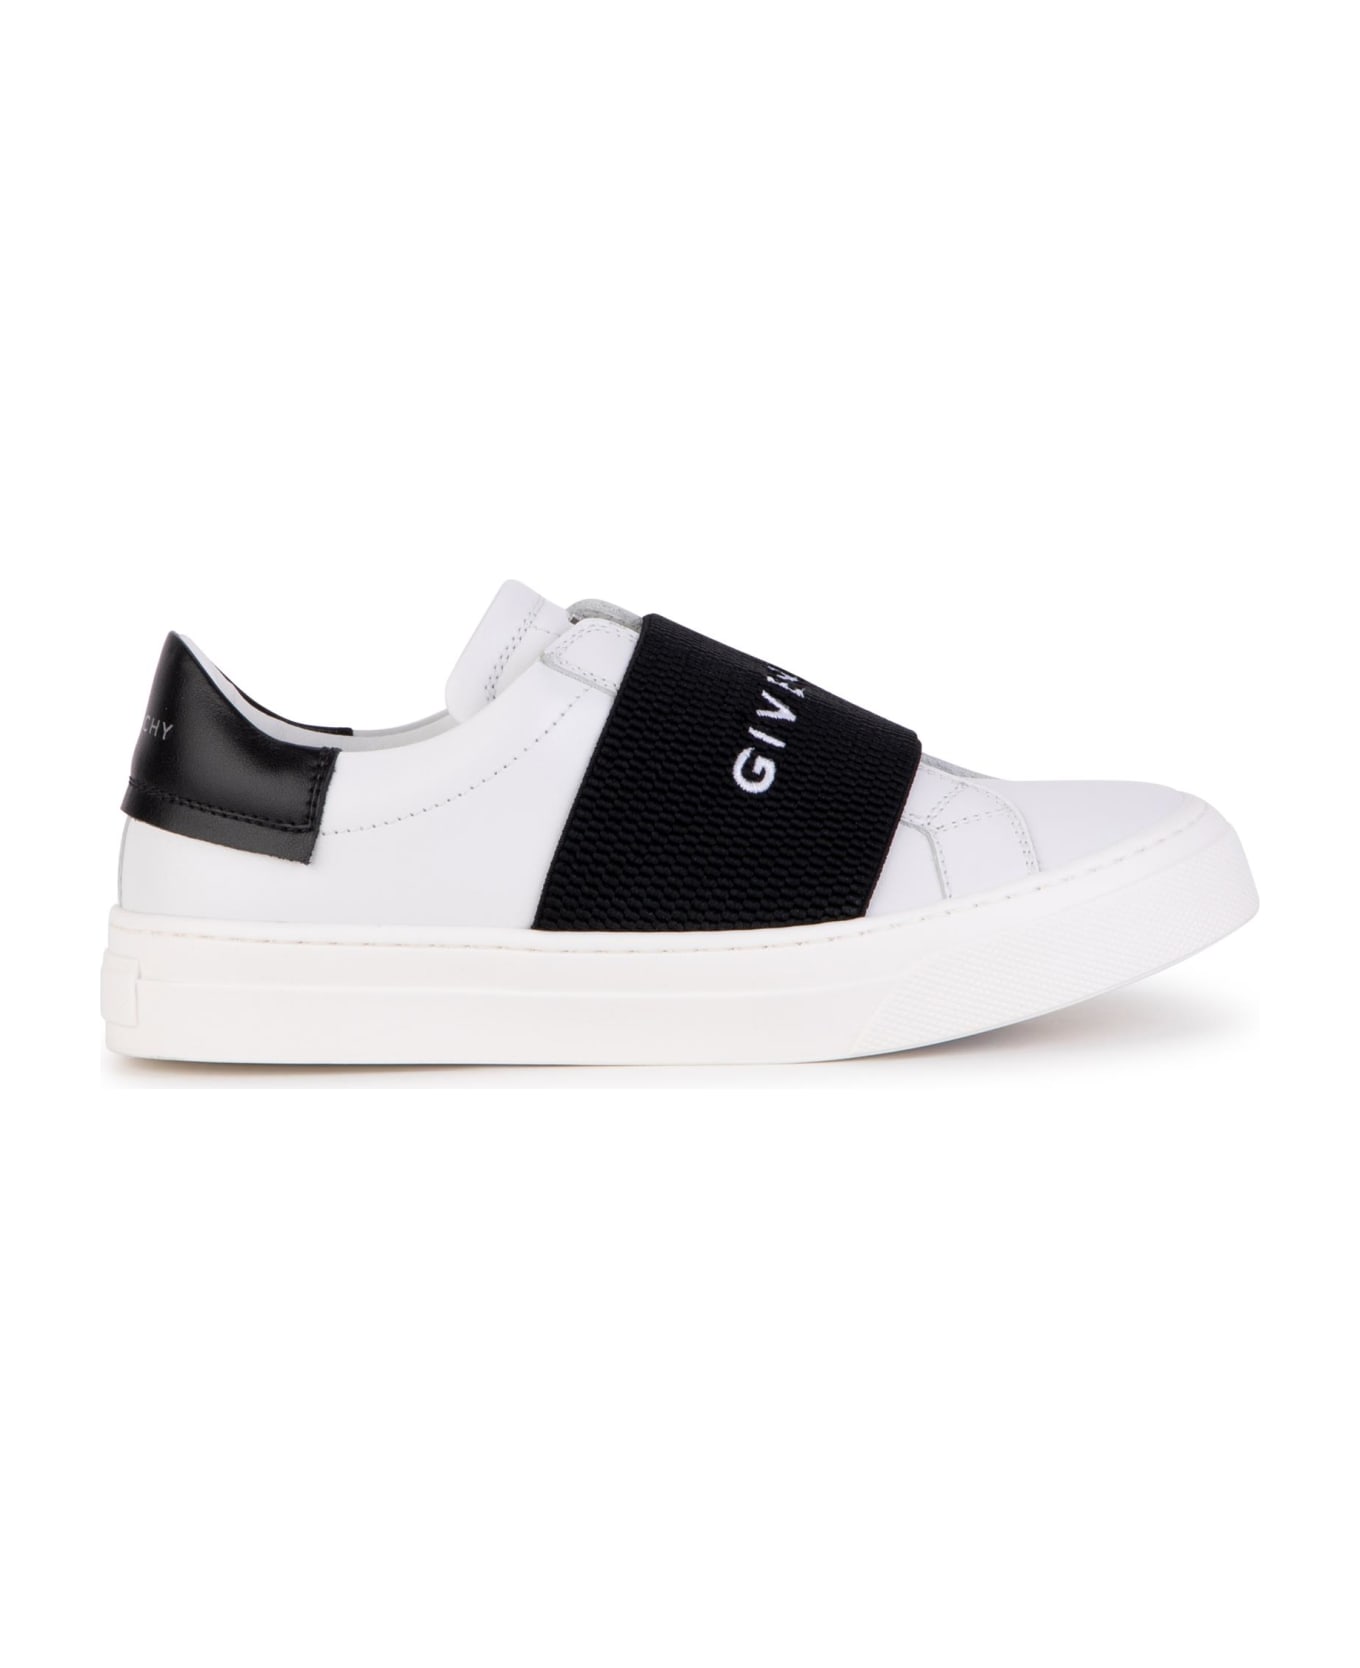 Givenchy Sneakers With Length - White